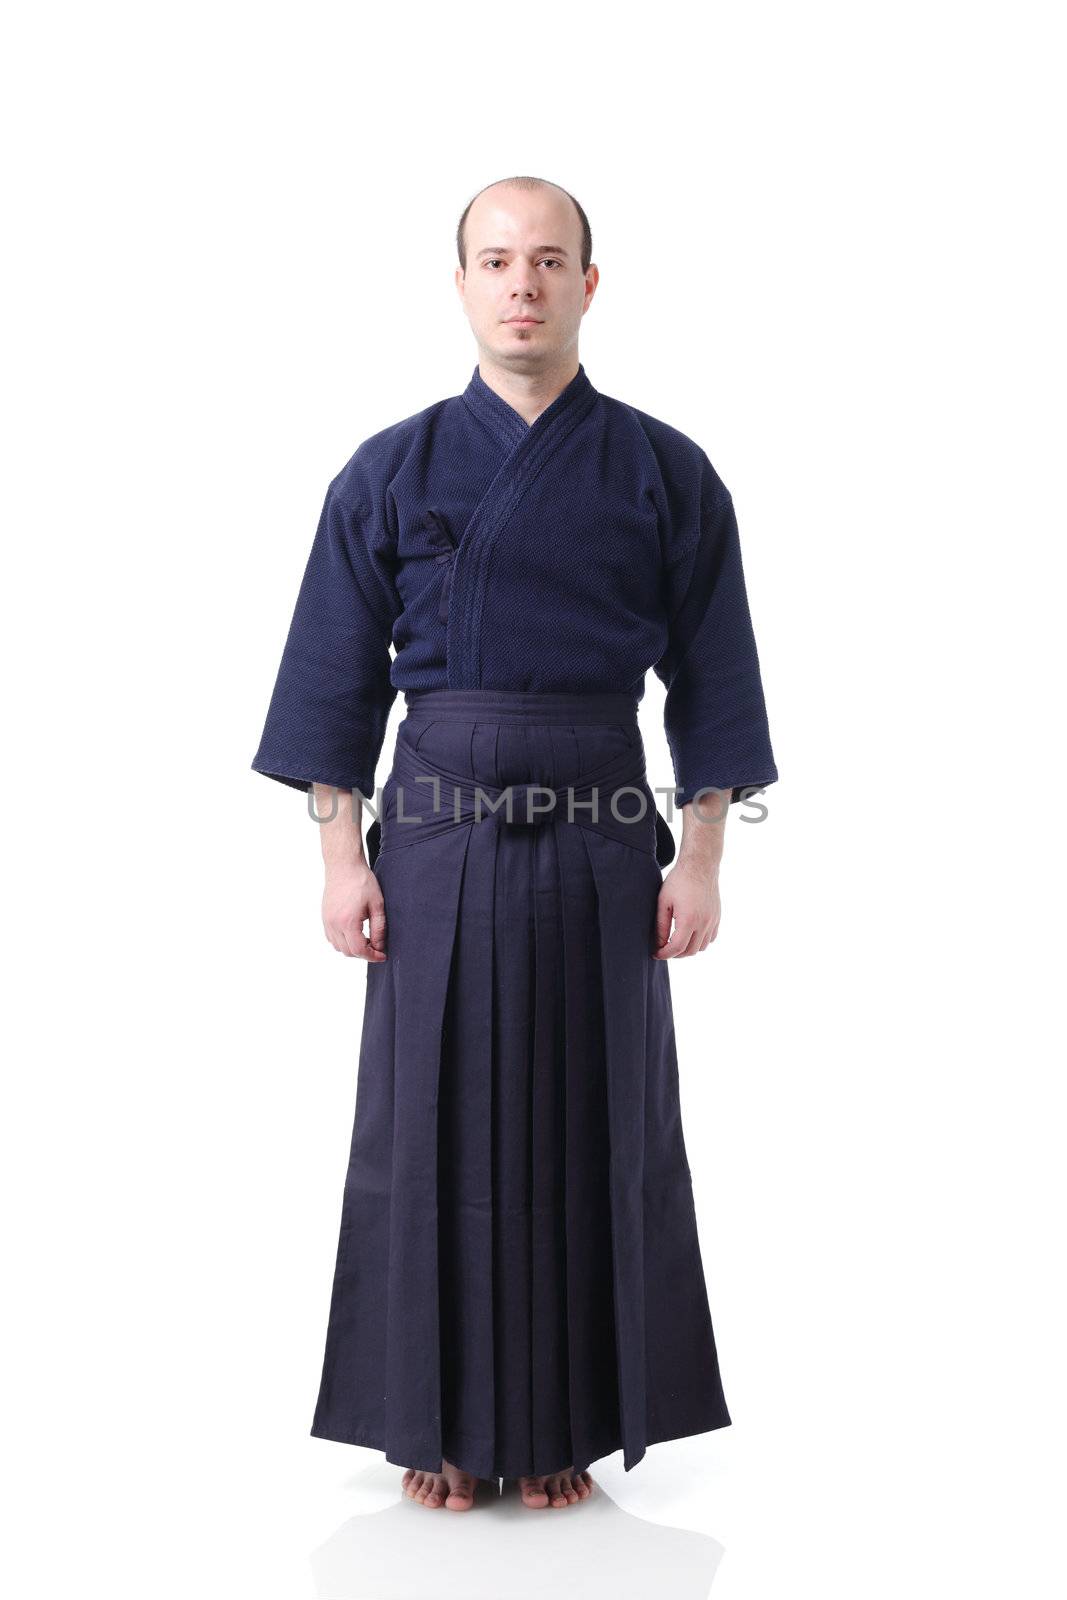 portrait of a kendo fighter, isolated on white